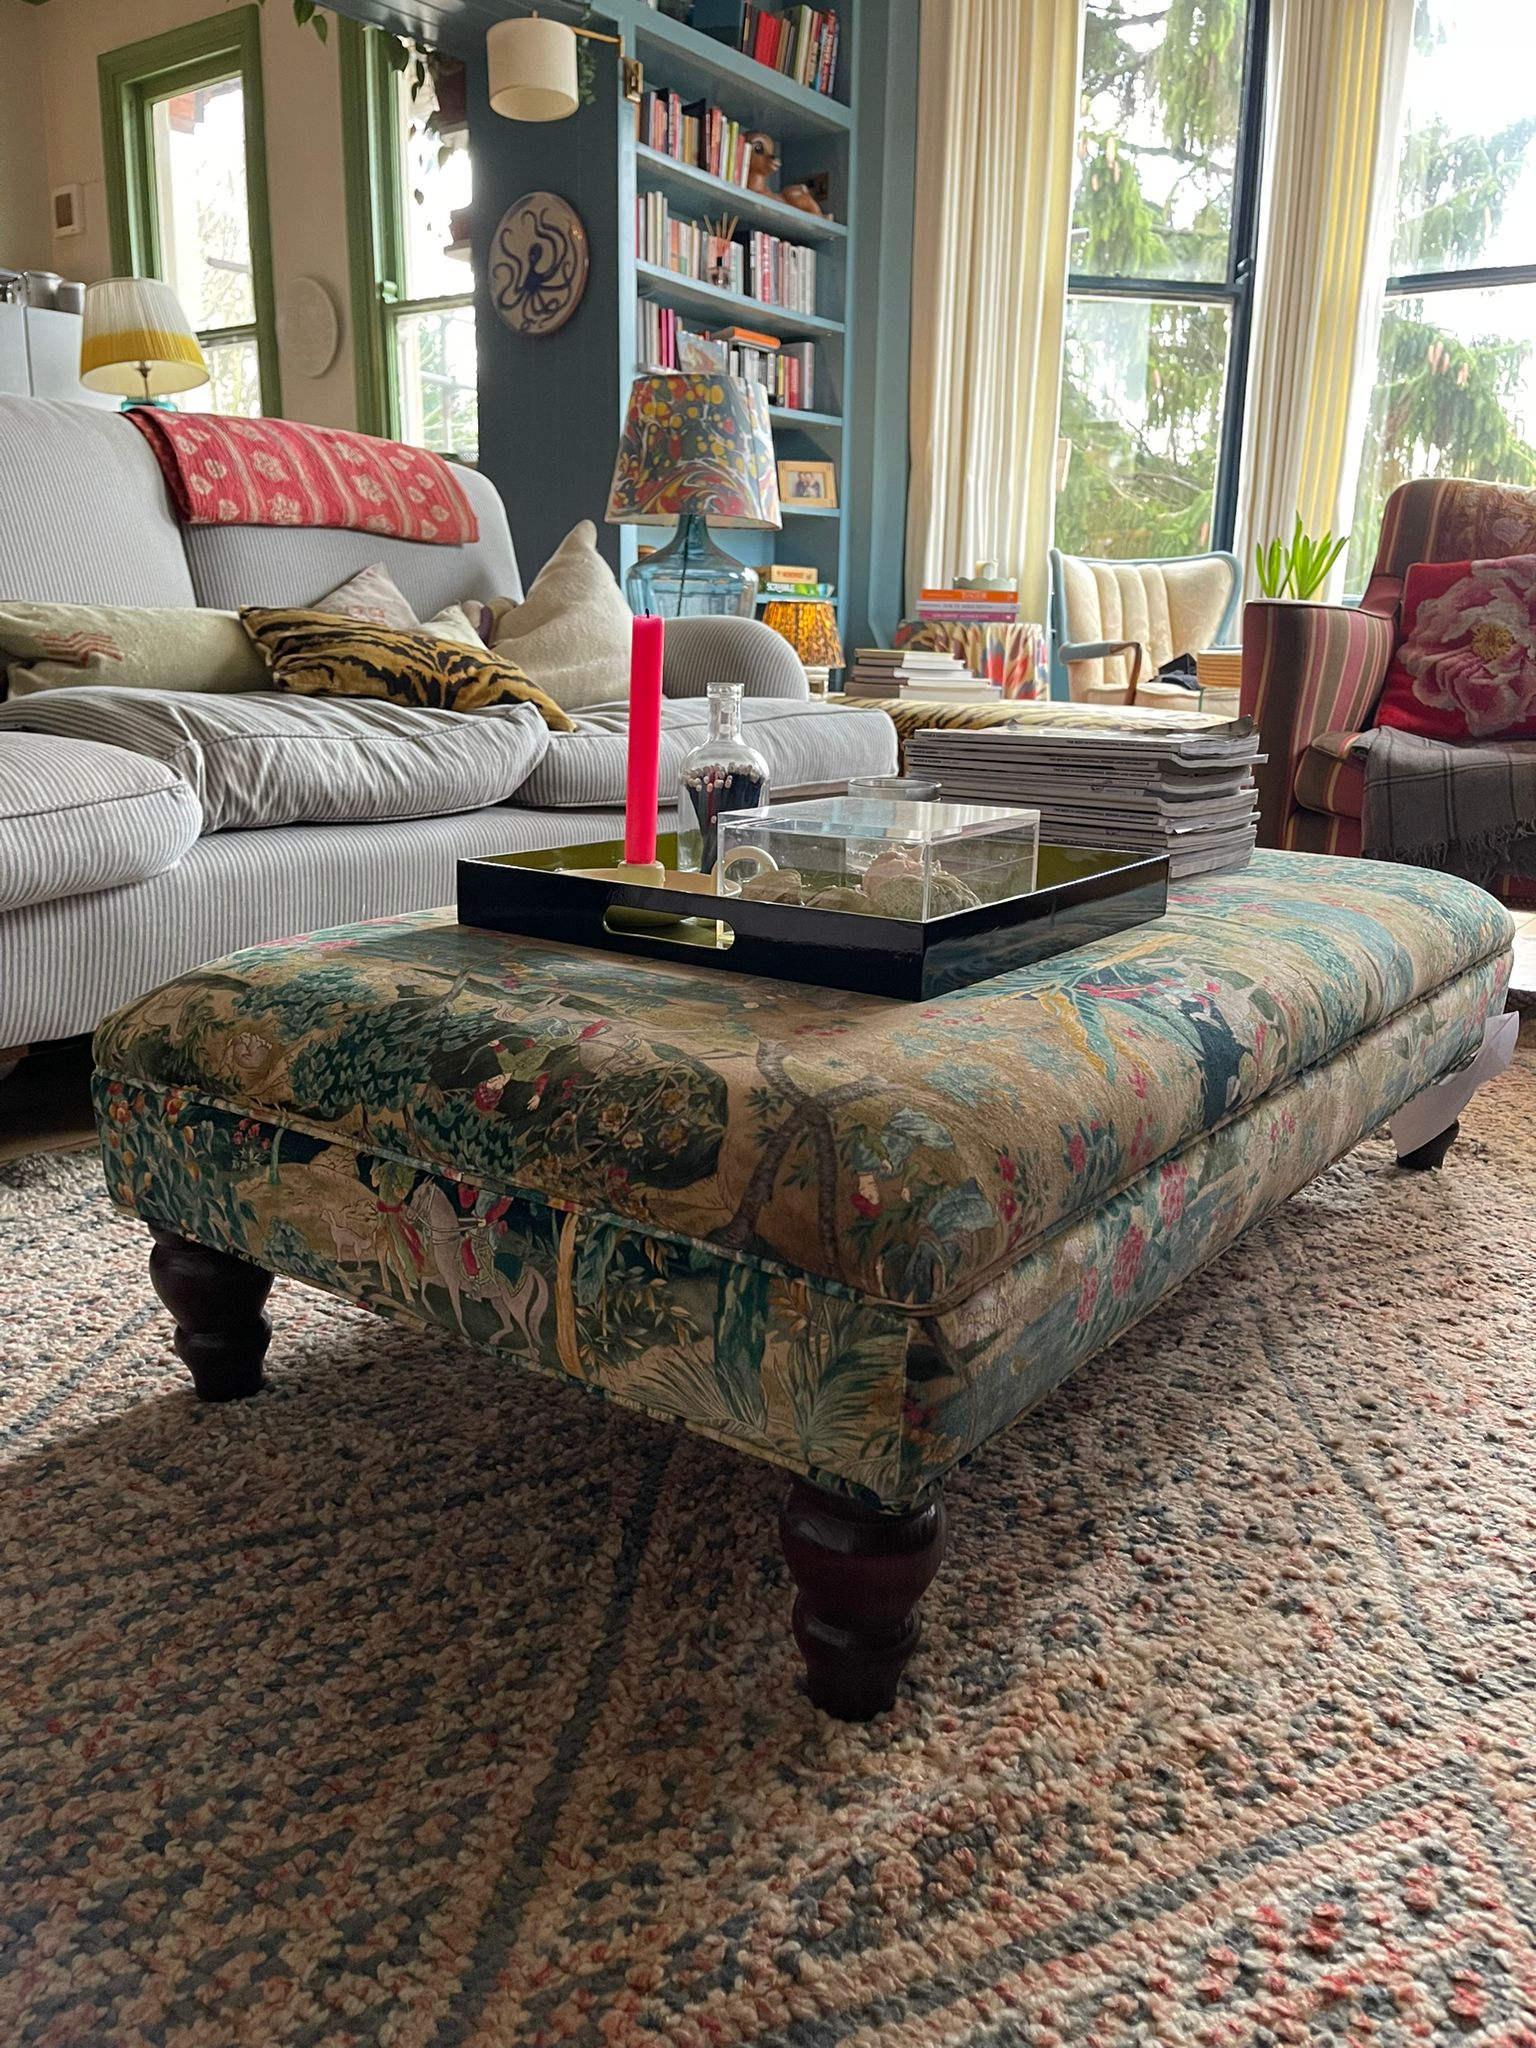 Bryher Classic Ottoman Large in GPJ Baker Ramayana Velvet - The House Upstairs